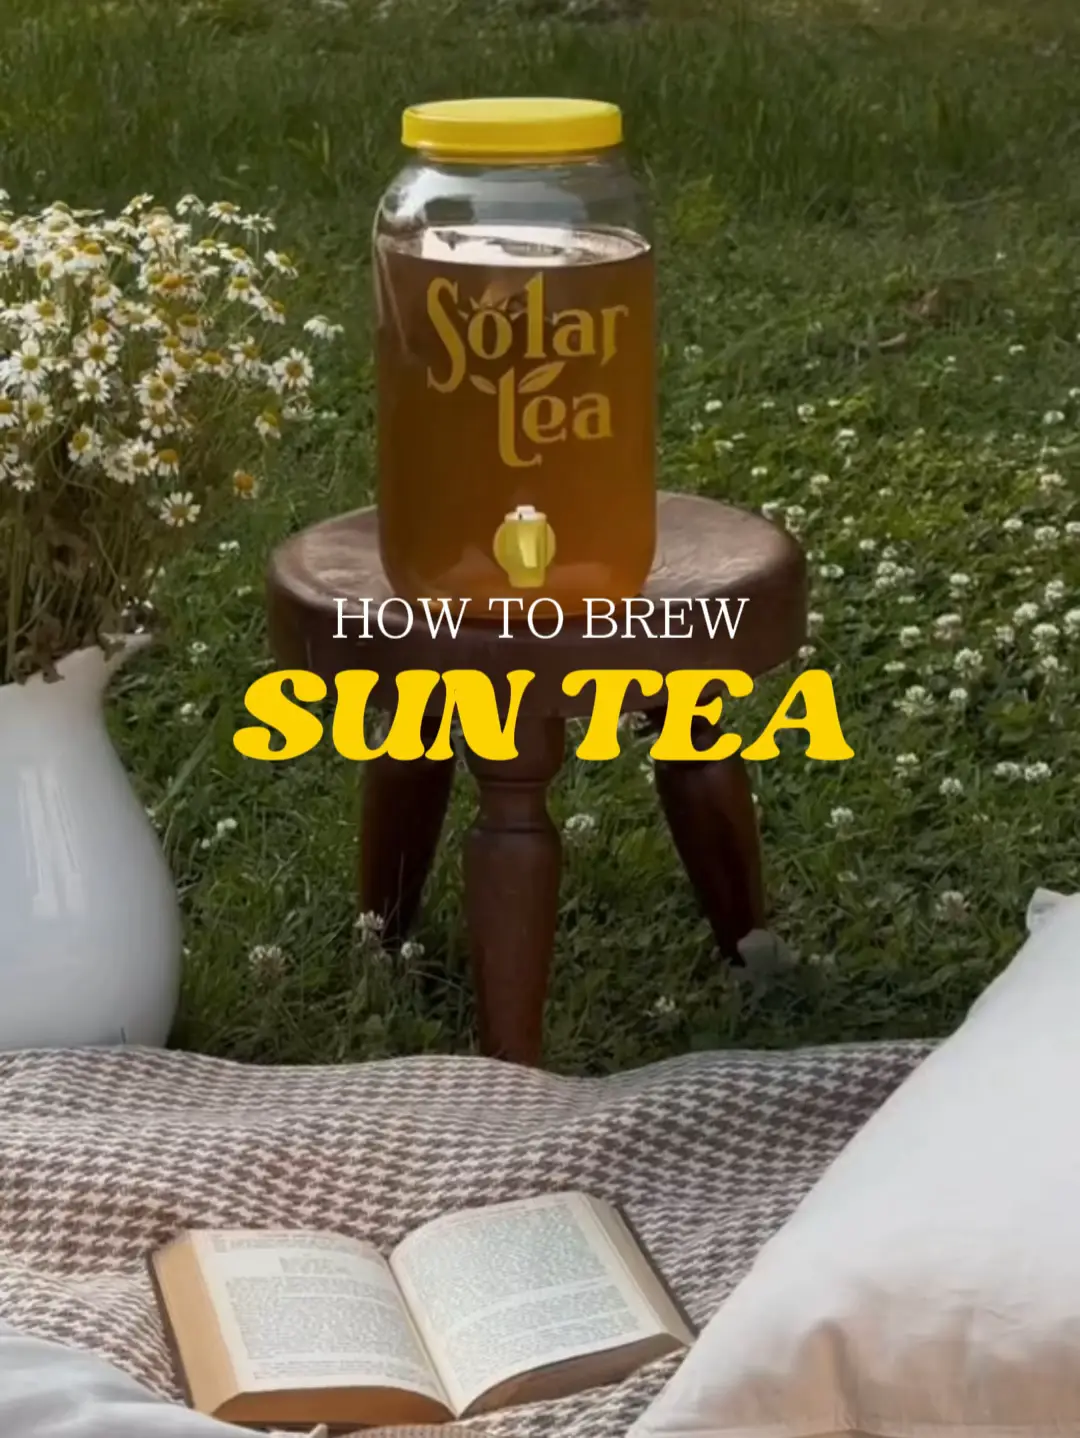 Sun Tea is the best!, Video published by McKenna Barry